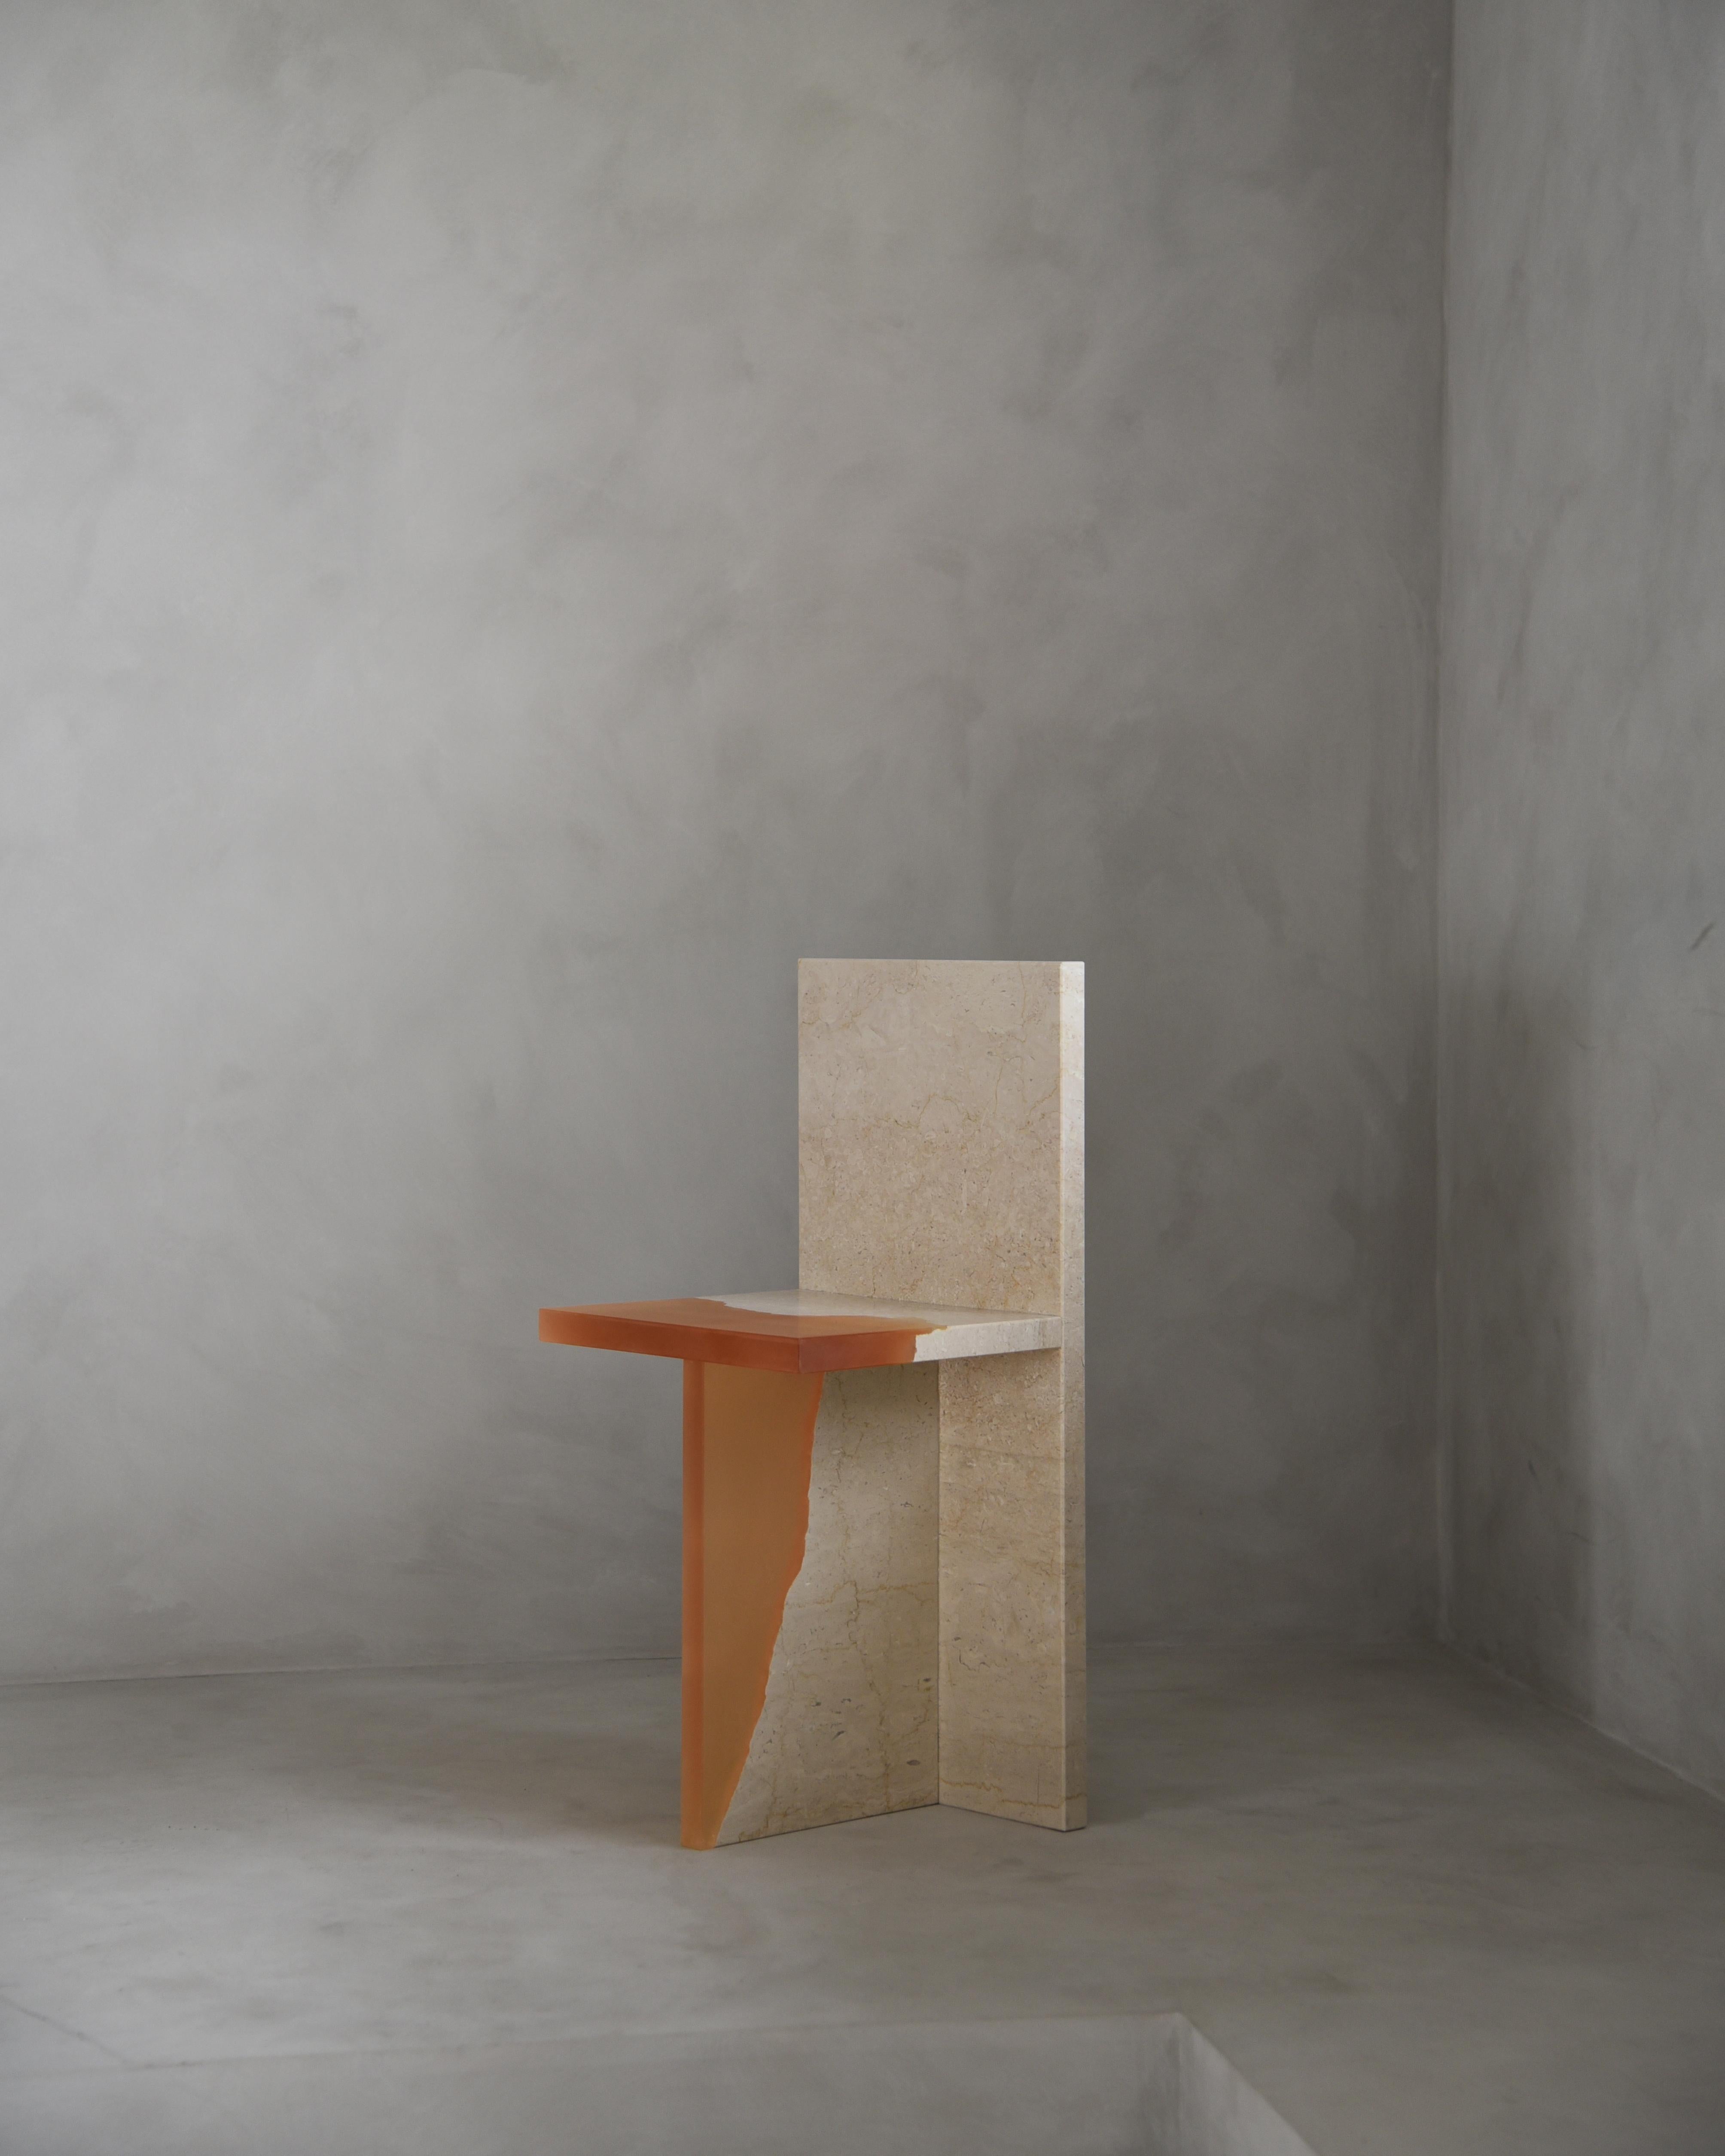 Crystal Resin and Marble, Fragment Chair, Jang Hea Kyoung 2